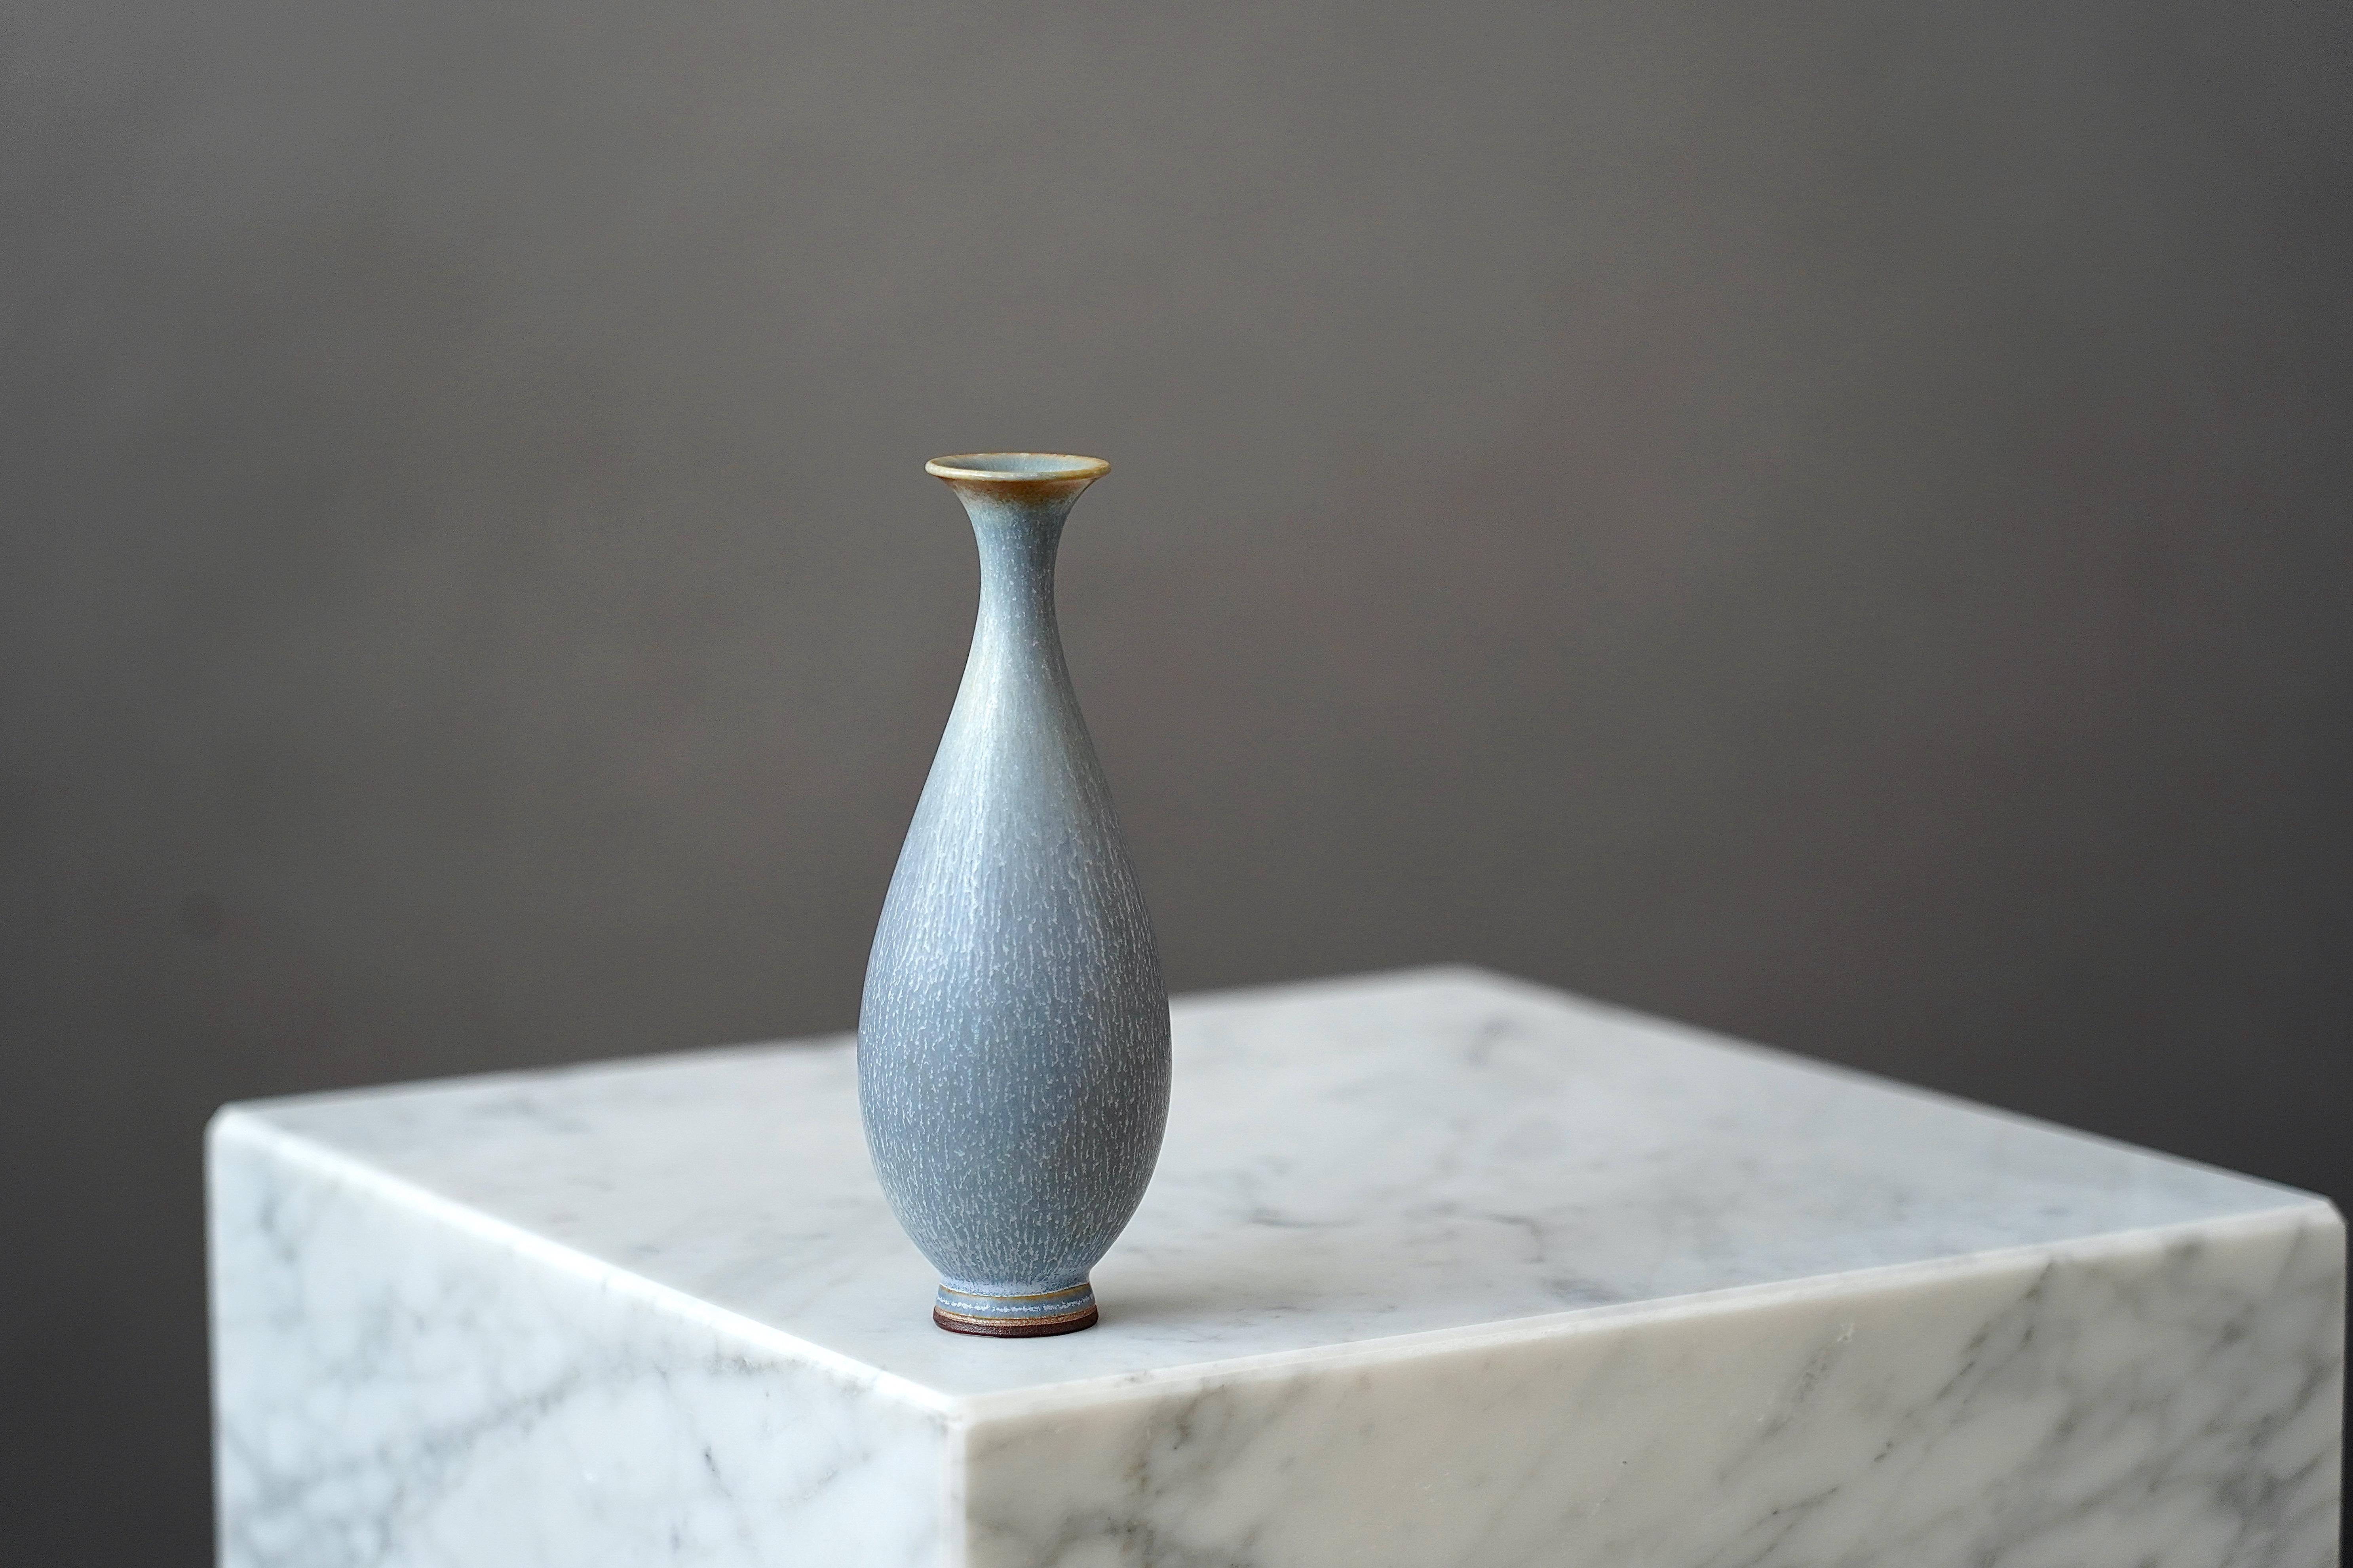 A beautiful stoneware vase with amazing hare’s fur glaze.
Made by master thrower Berndt Friberg, in the artist's studio at Gustavsberg, Sweden.

Great condition. Incised signature 